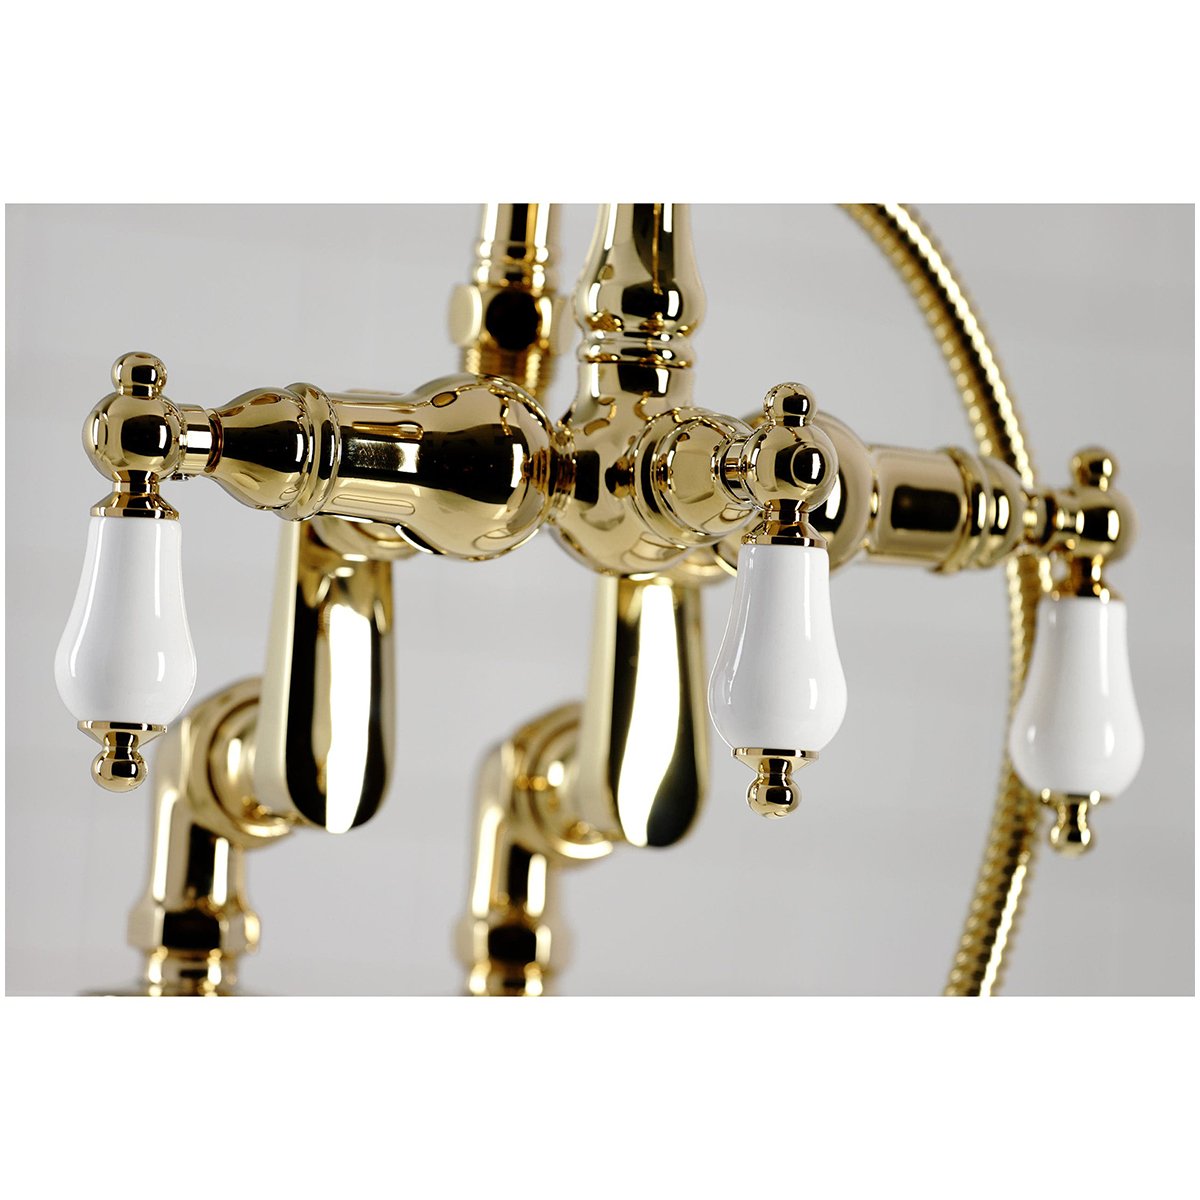 Kingston Brass CC6015TX-PVintage Clawfoot Tub Faucet with Hand Shower